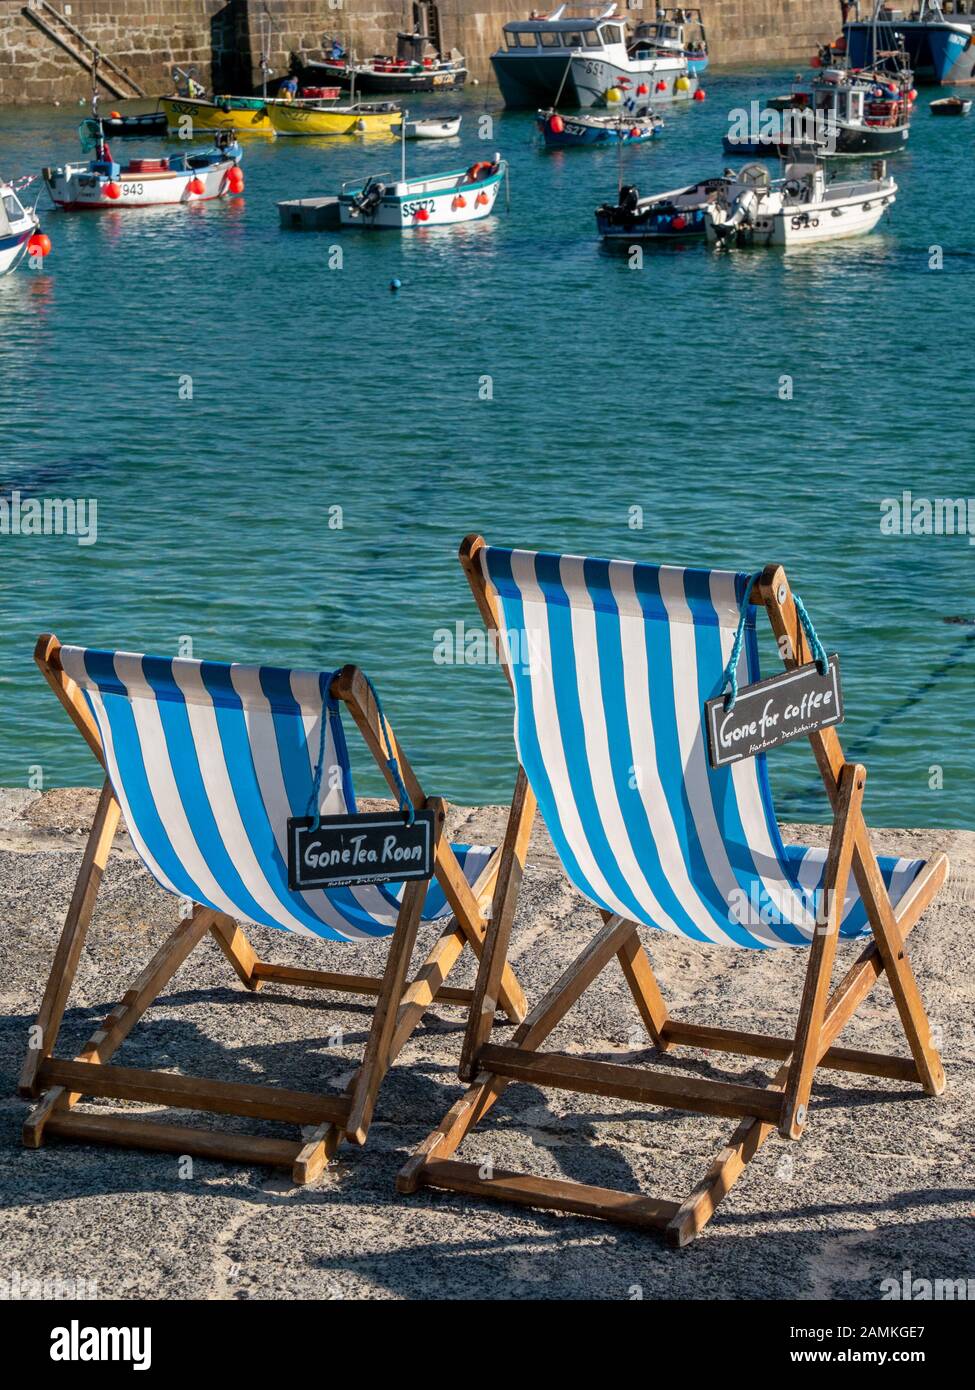 Two empty but reserved blue and white striped deckchairs with 'Gone for Tea / Coffee signs' in Summer, St. Ives Harbourside, Cornwall, England, UK Stock Photo